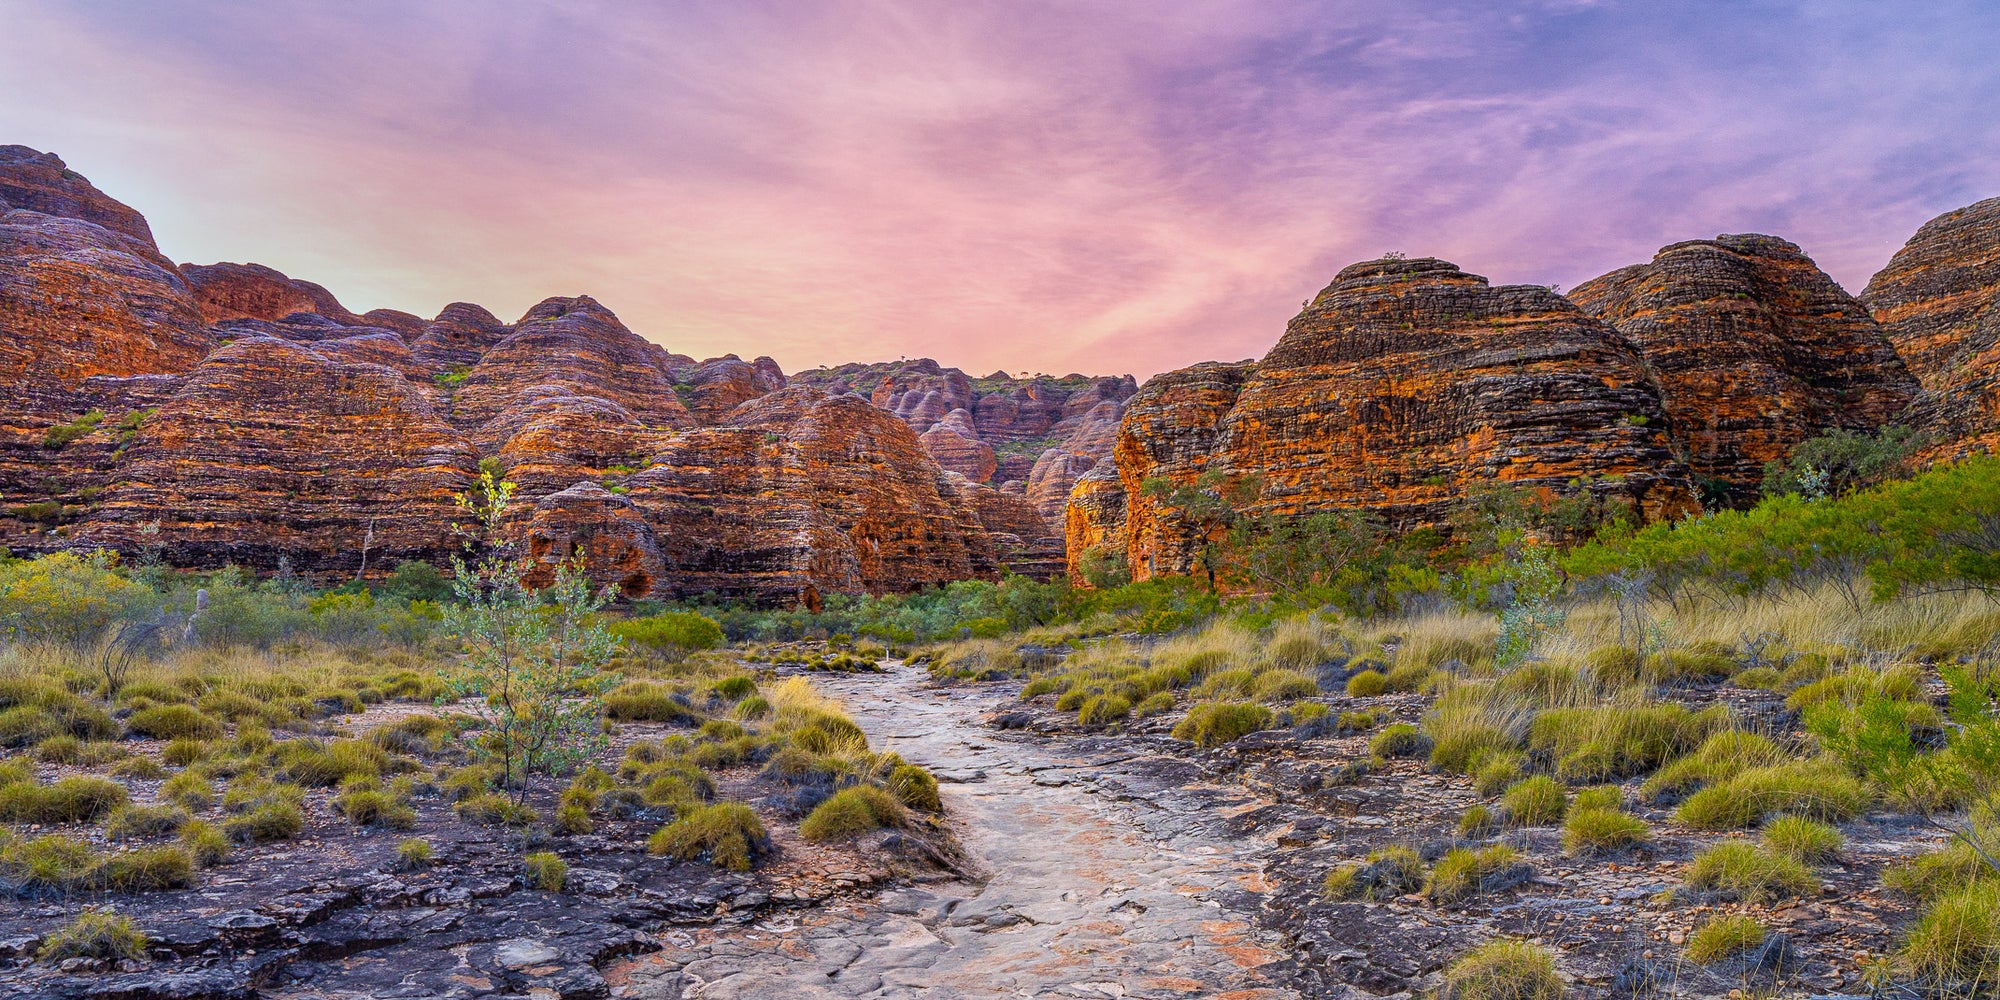 The Domes at Purnululu